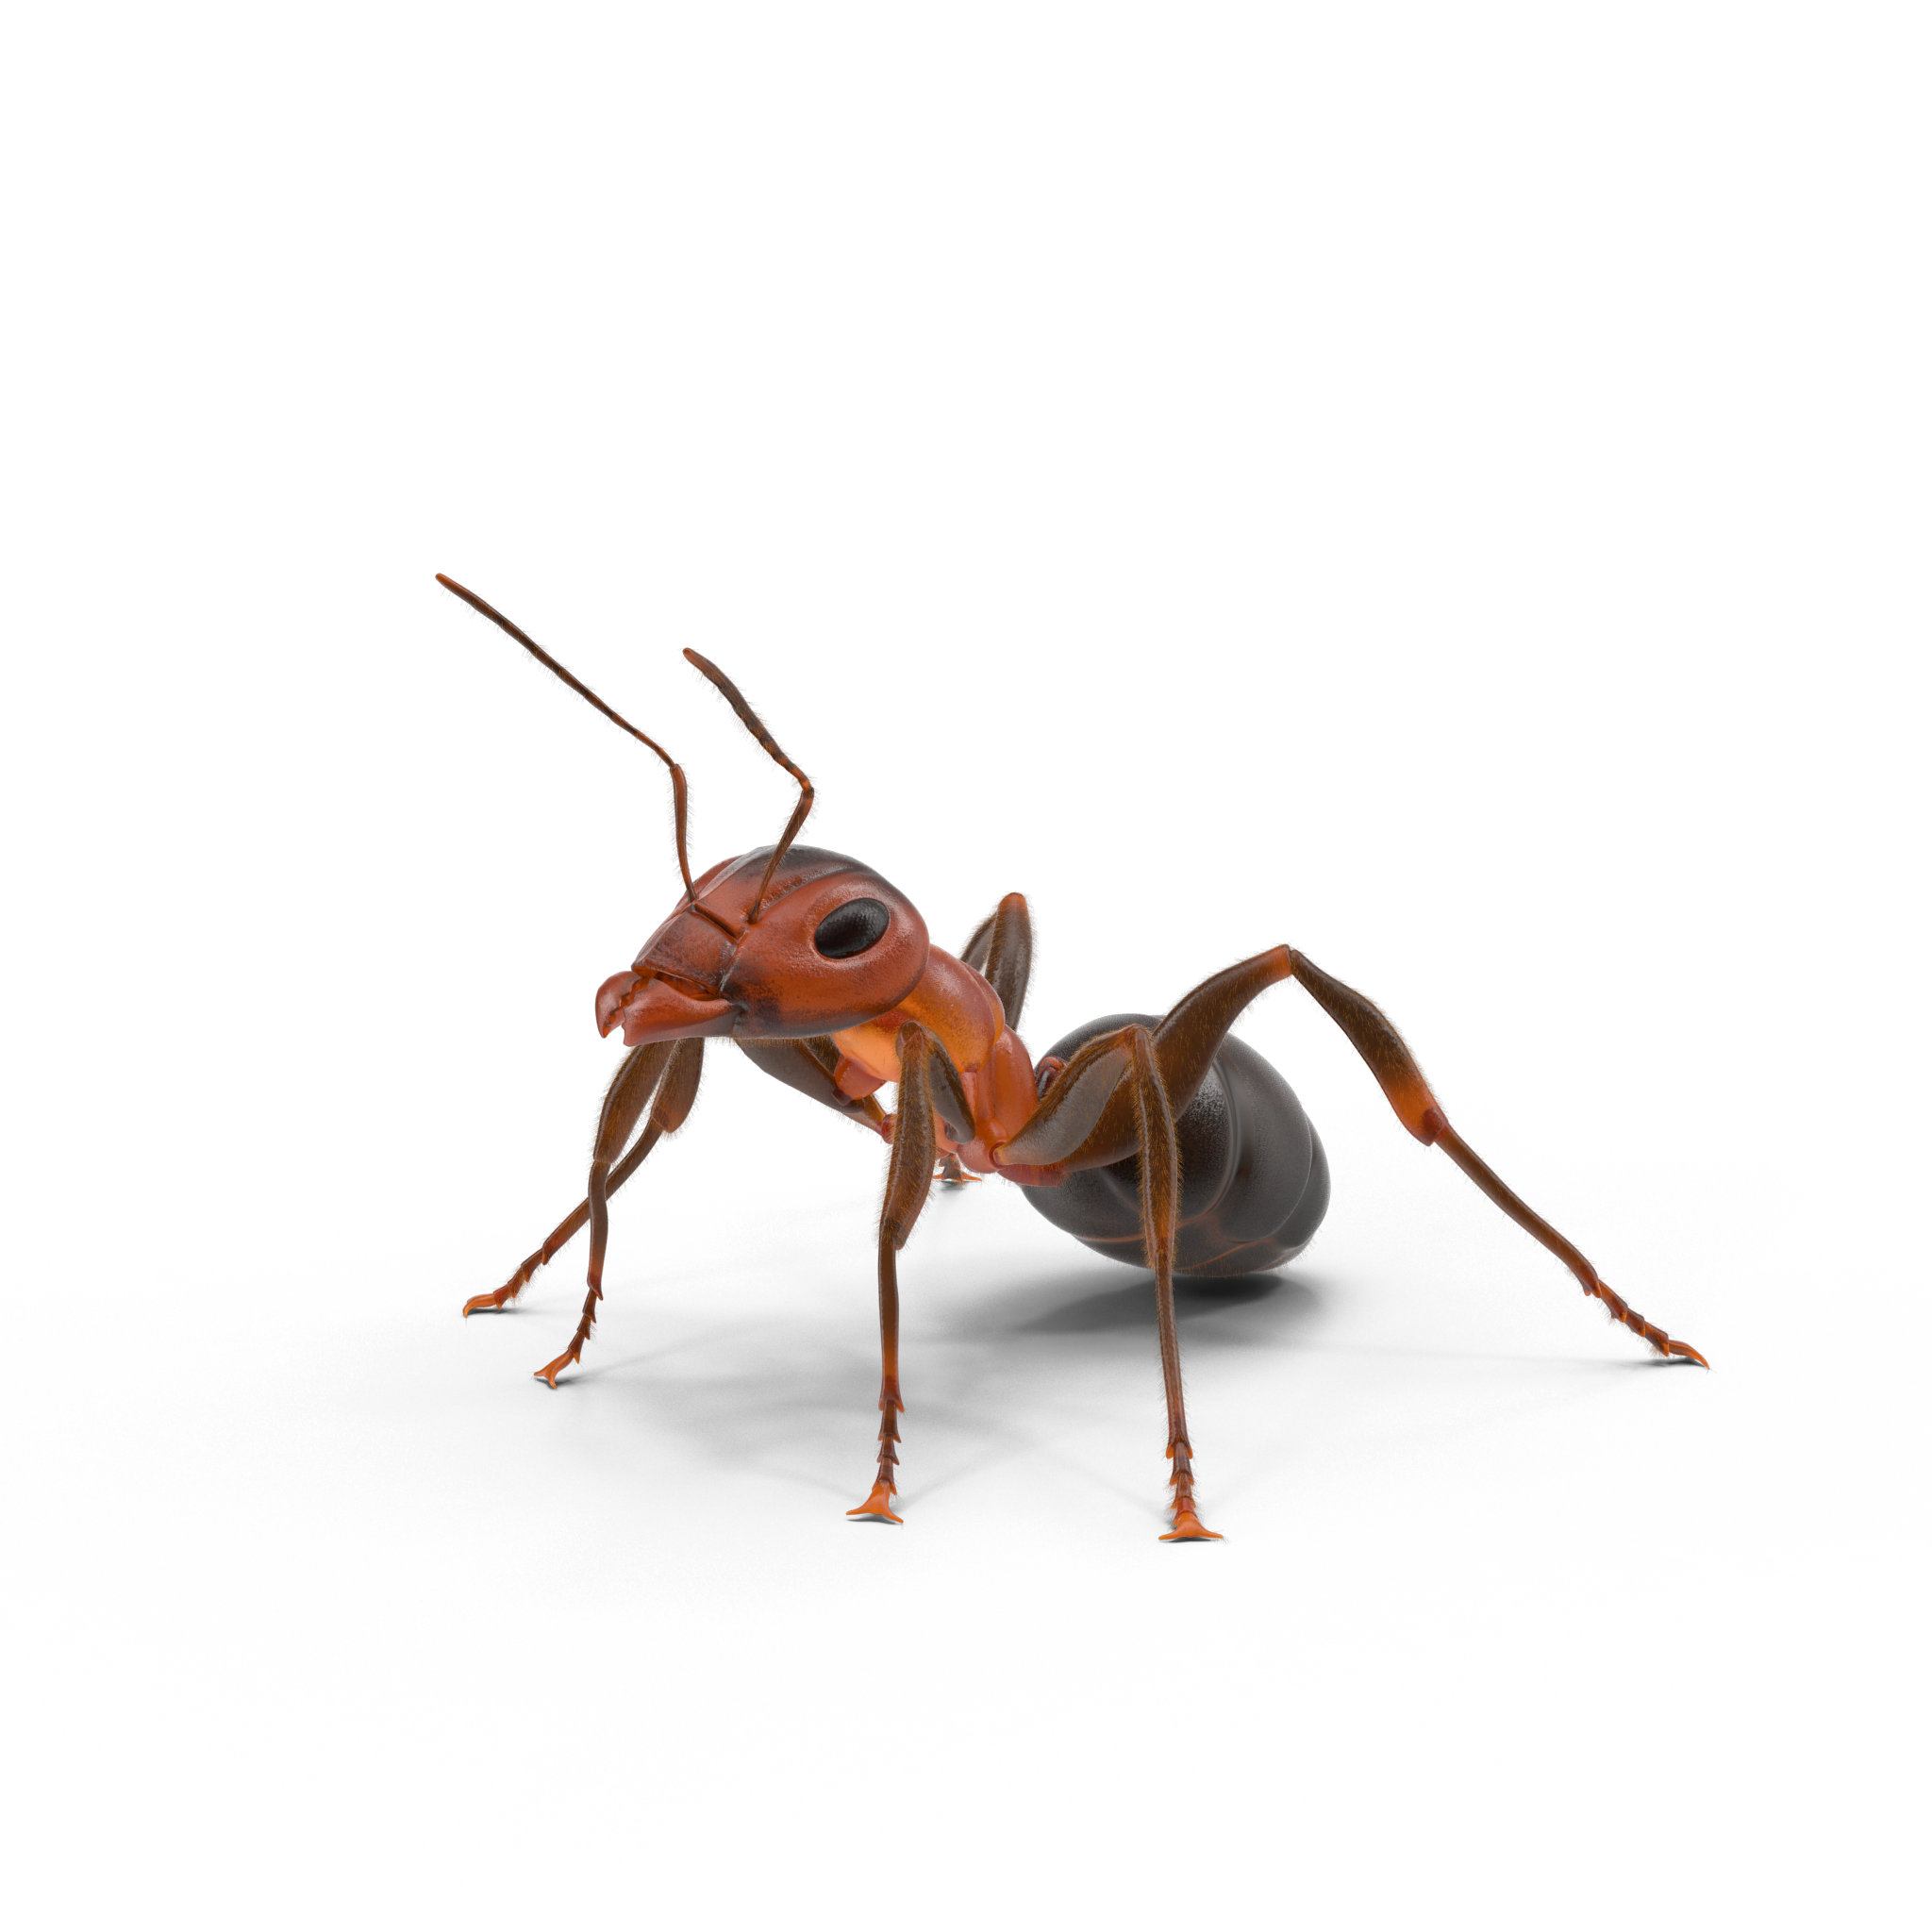 Ant.h03.2k（1）.png